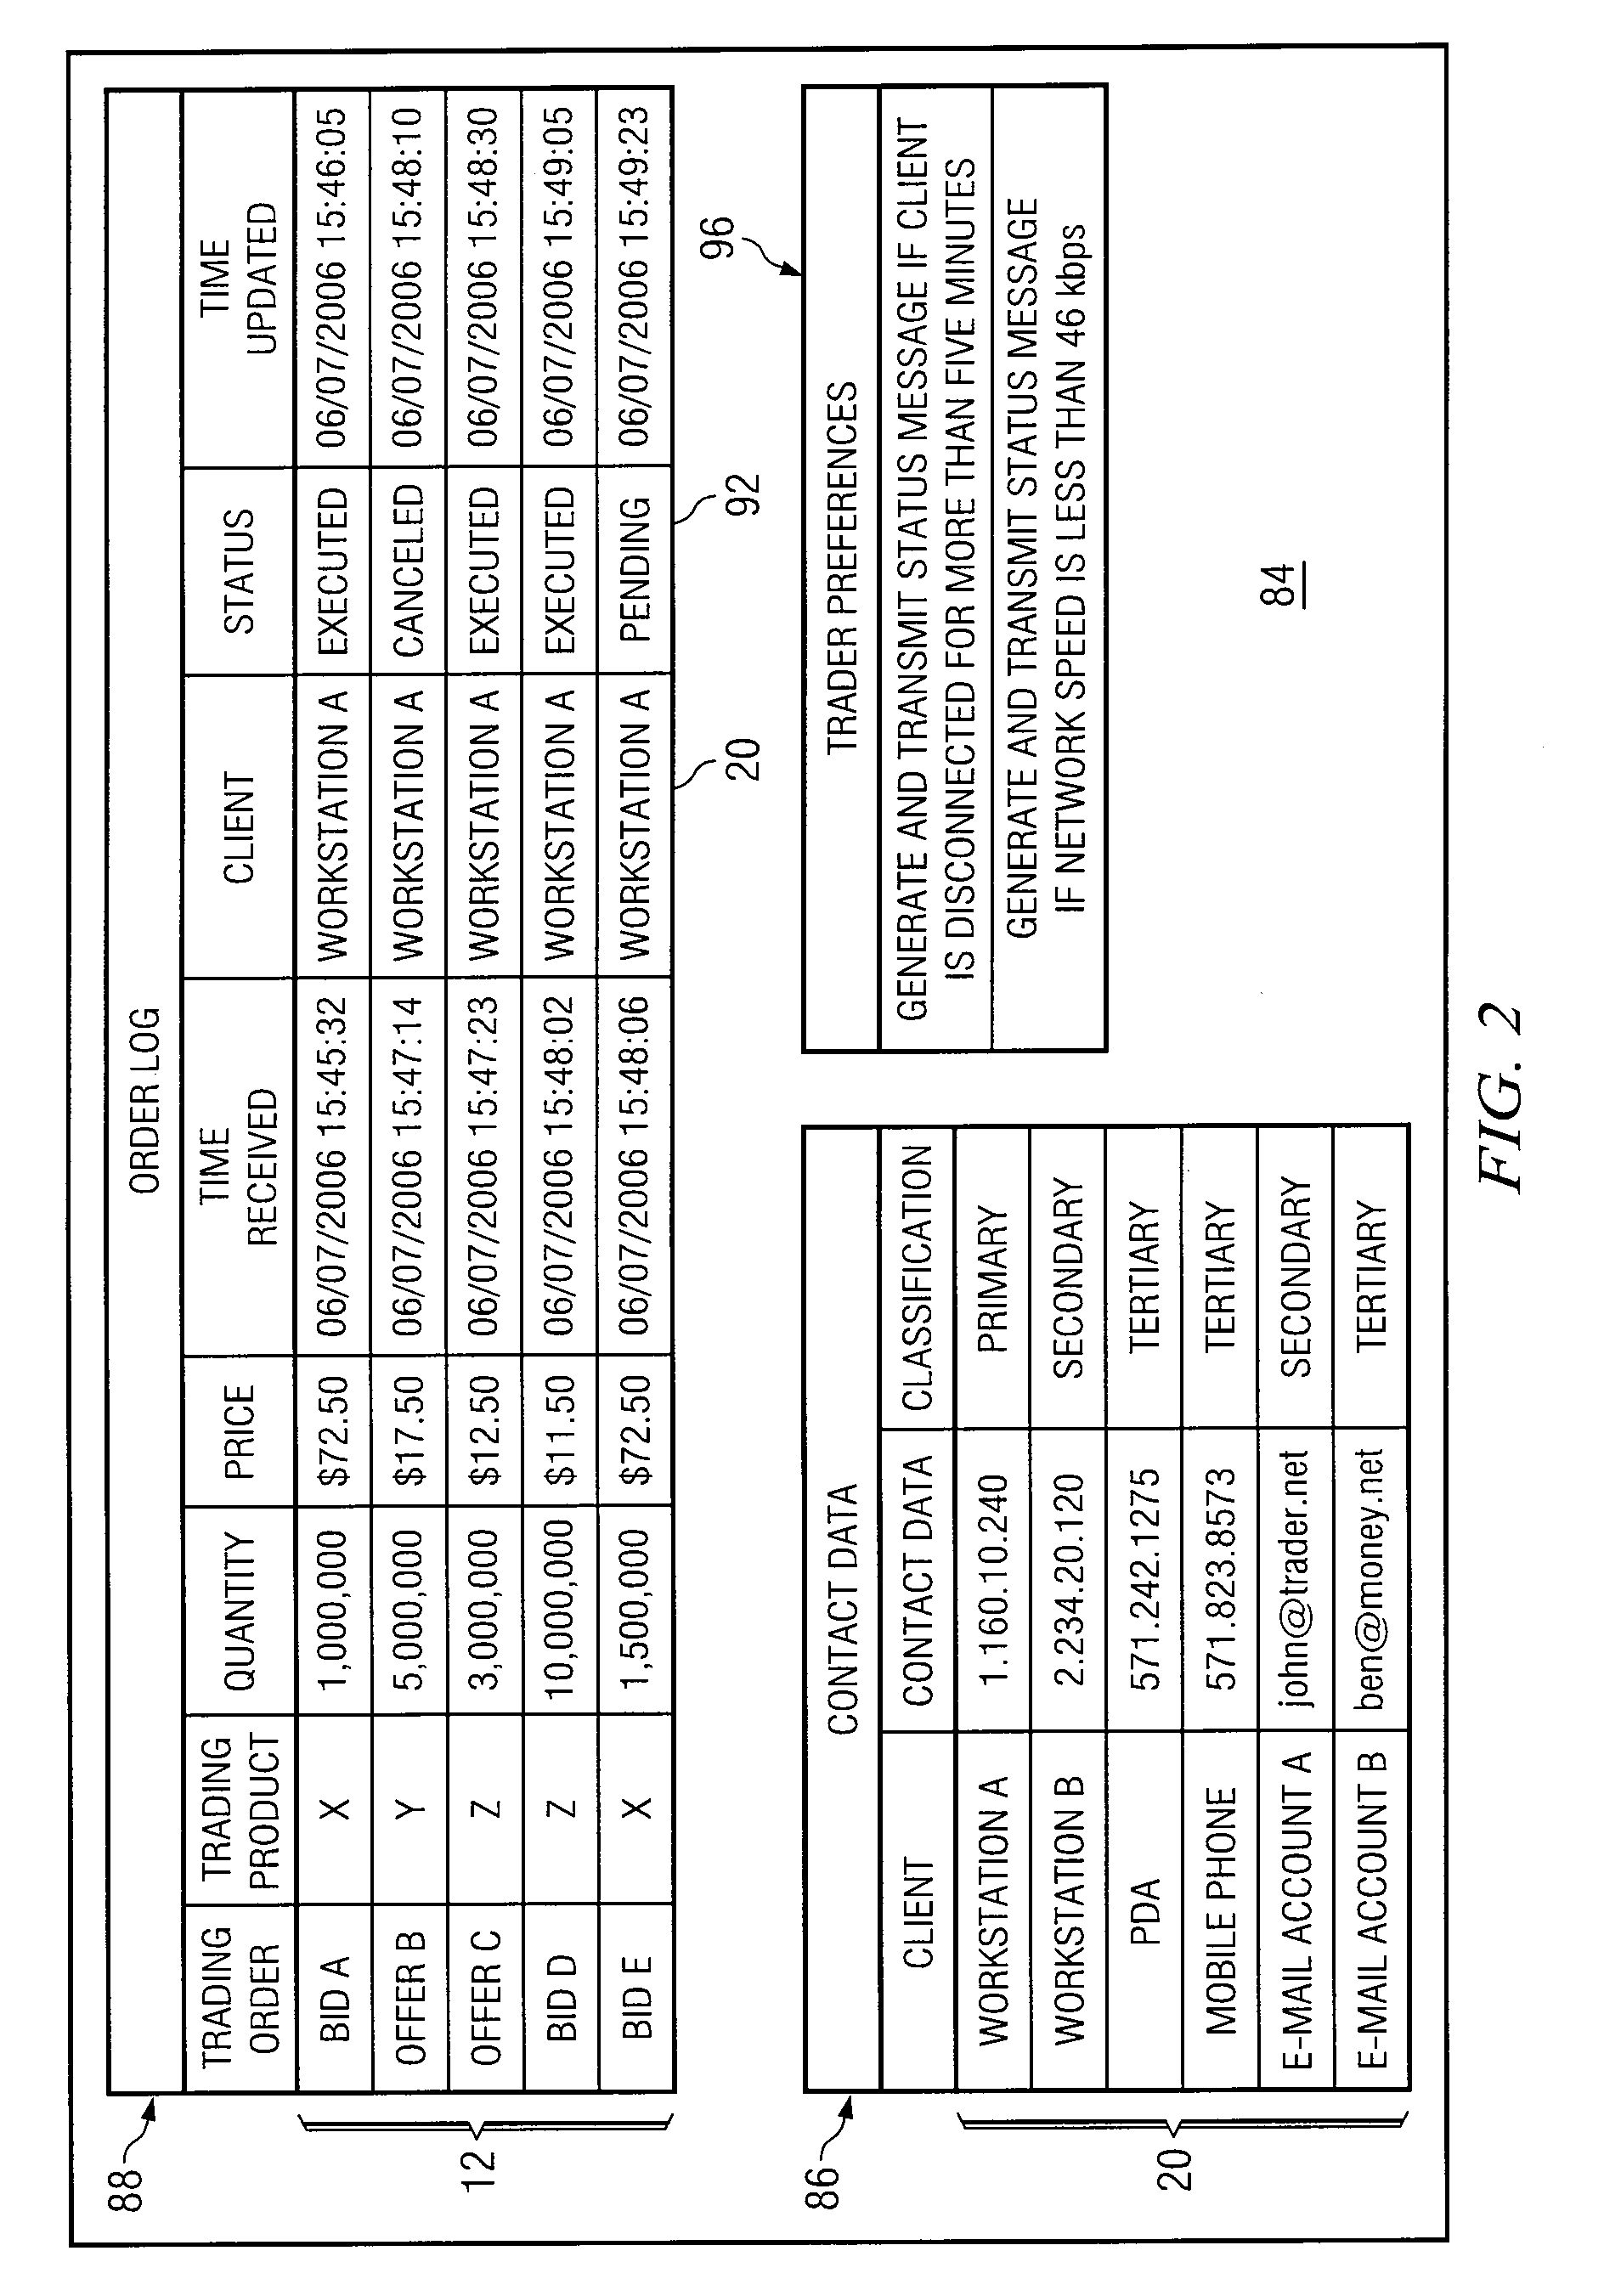 System and Method for Error Detection and Recovery in an Electronic Trading System